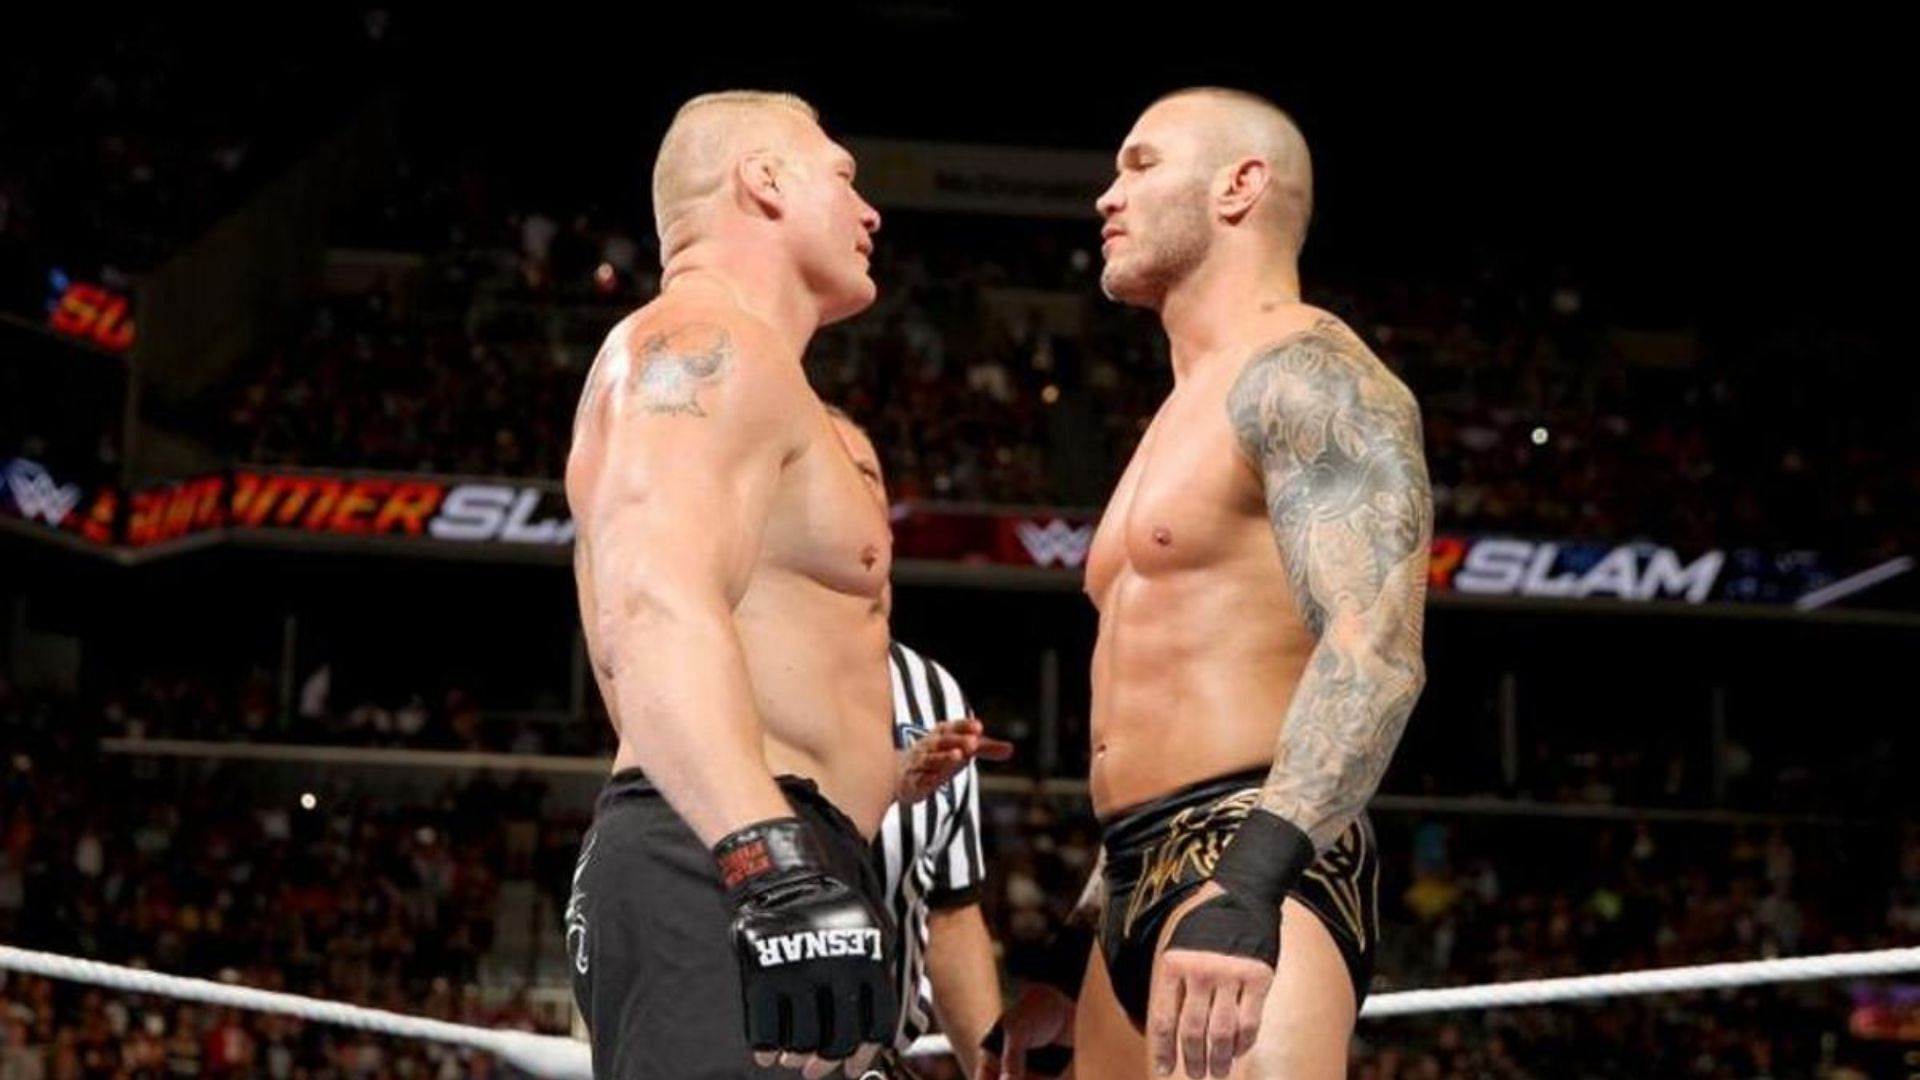 Brock Lesnar and Randy Orton competed in the main event of Summerslam 2016.